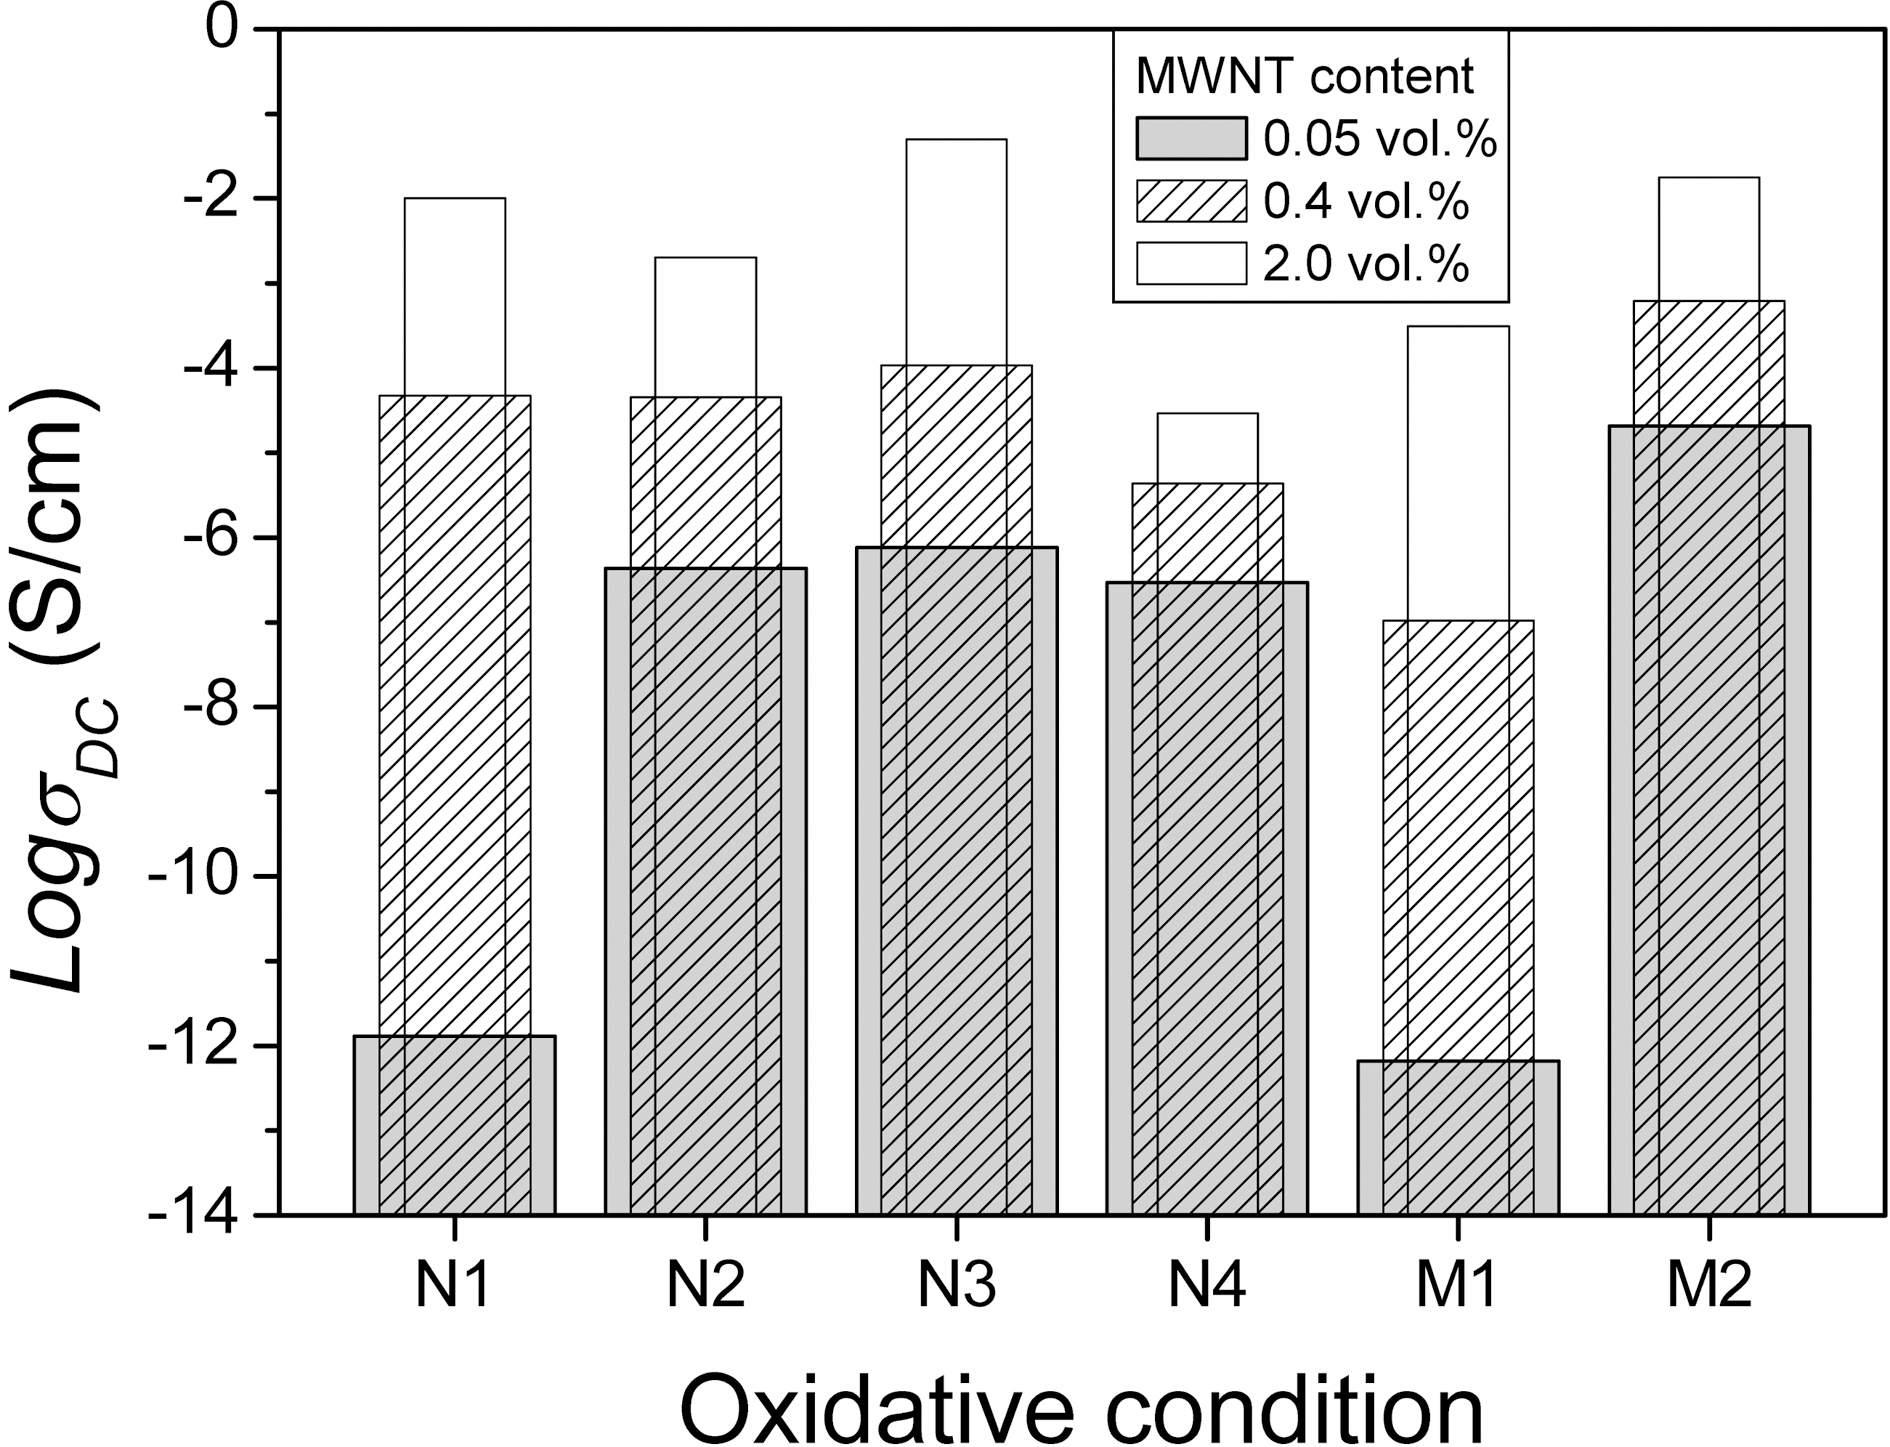 DC conductivity as a function of the MWNT content of the PU composites with respect to the oxidation conditions represented in Table 1. The benzalkonium chloride at all compositions is 0.6 wt.% to the oxidized MWNT content.